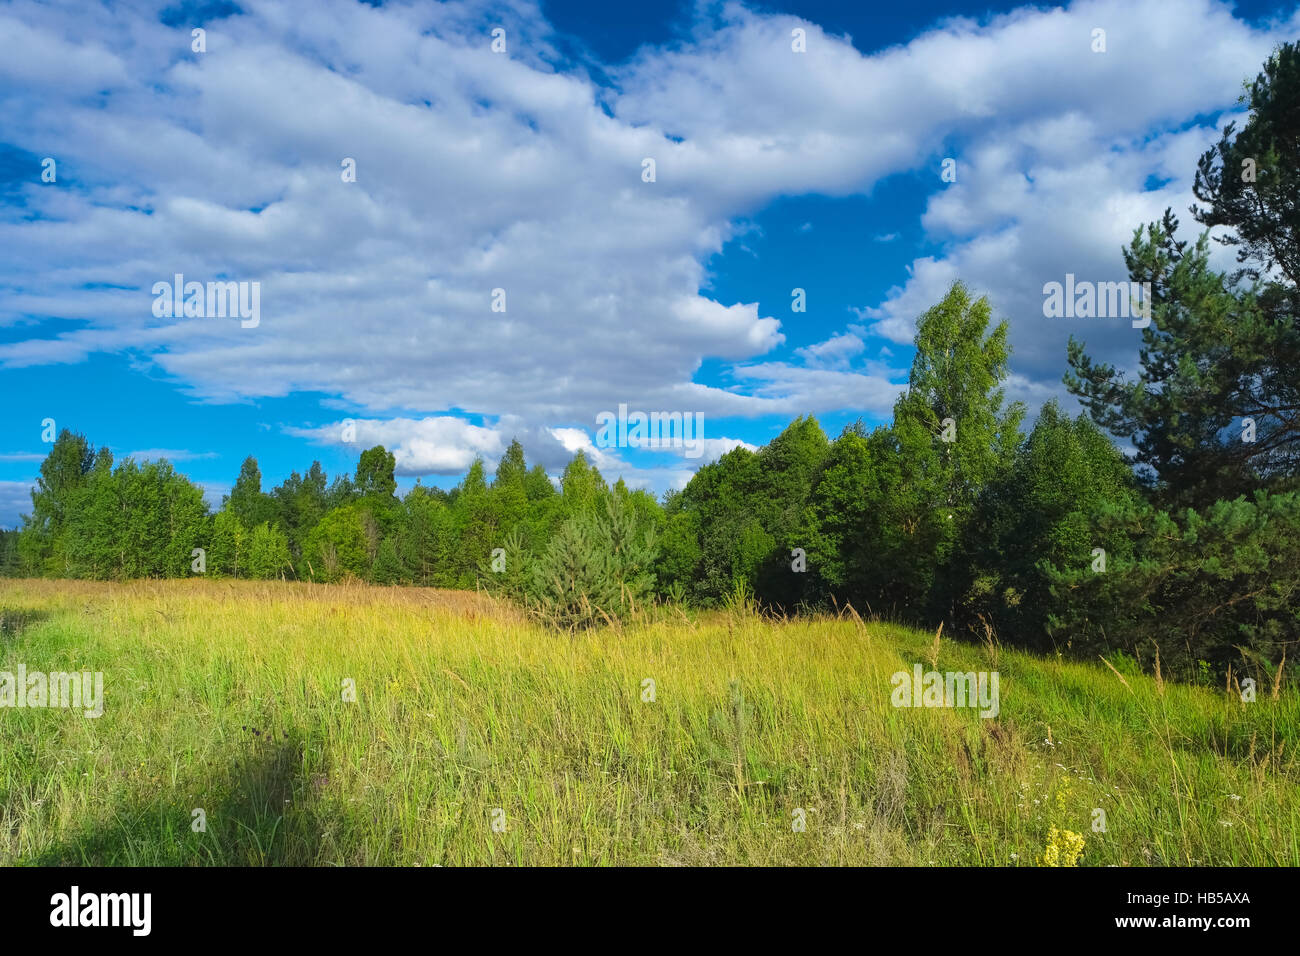 Beautiful summer scenery with trees, grass and blue cloudy sky. Scenic natural landscape. Stock Photo